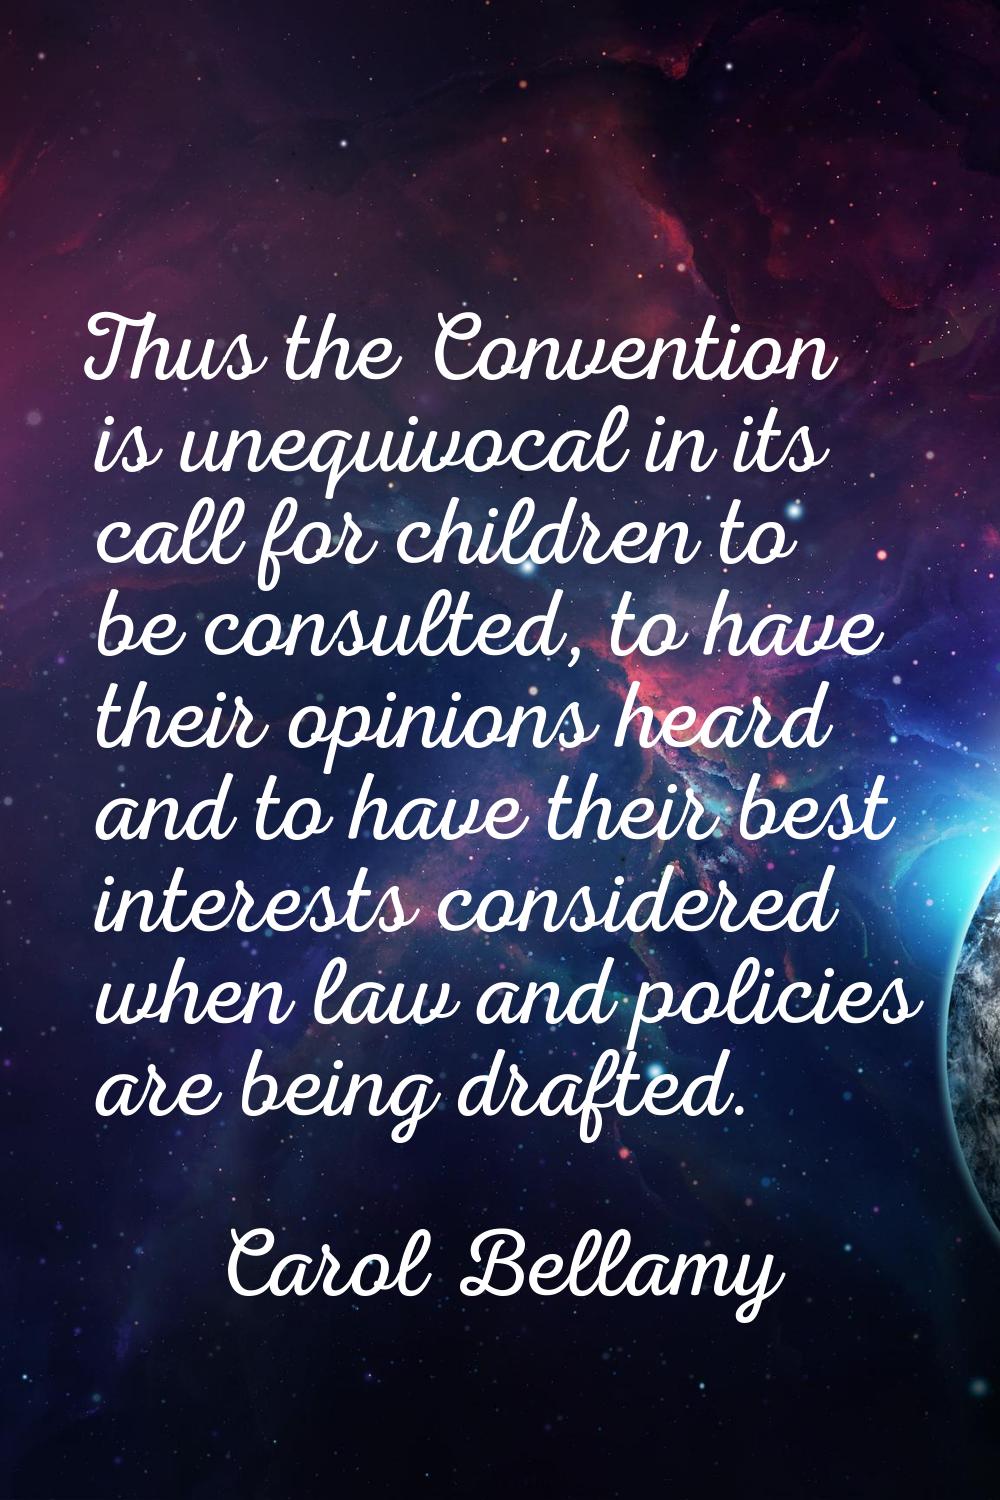 Thus the Convention is unequivocal in its call for children to be consulted, to have their opinions